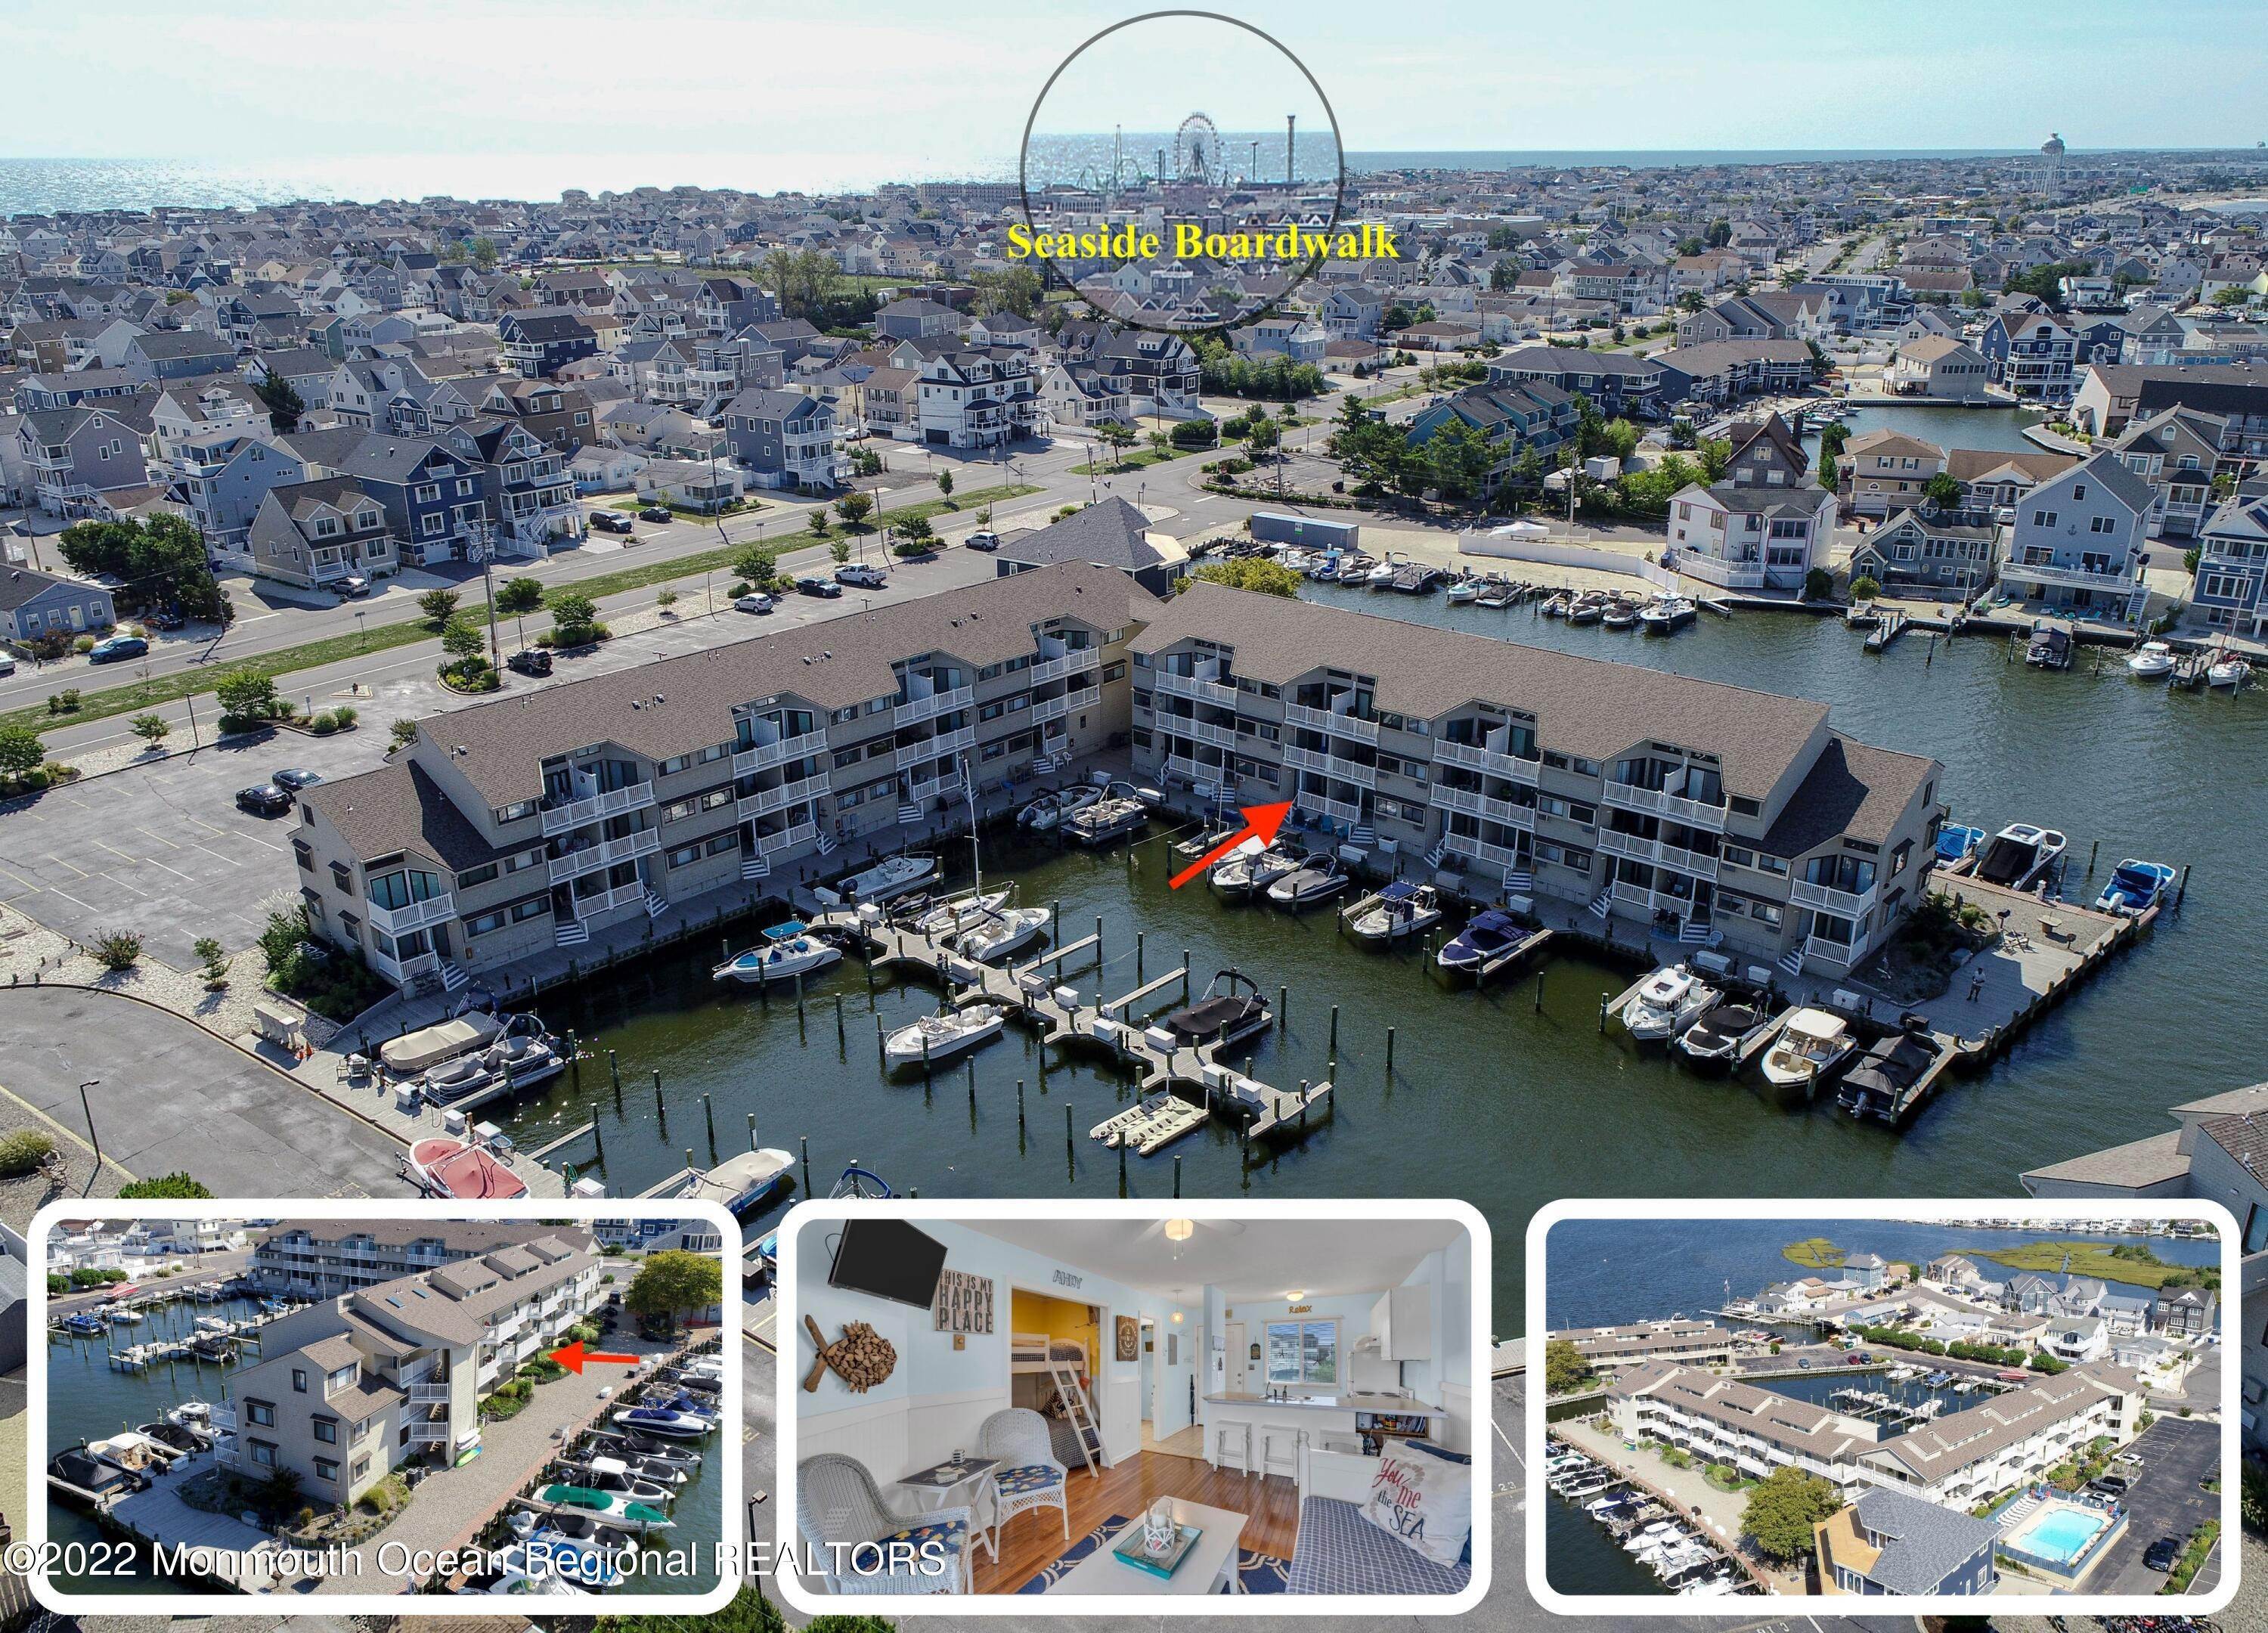 Property for Sale at 1919 Bay Boulevard B13 Ortley Beach, New Jersey 08751 United States